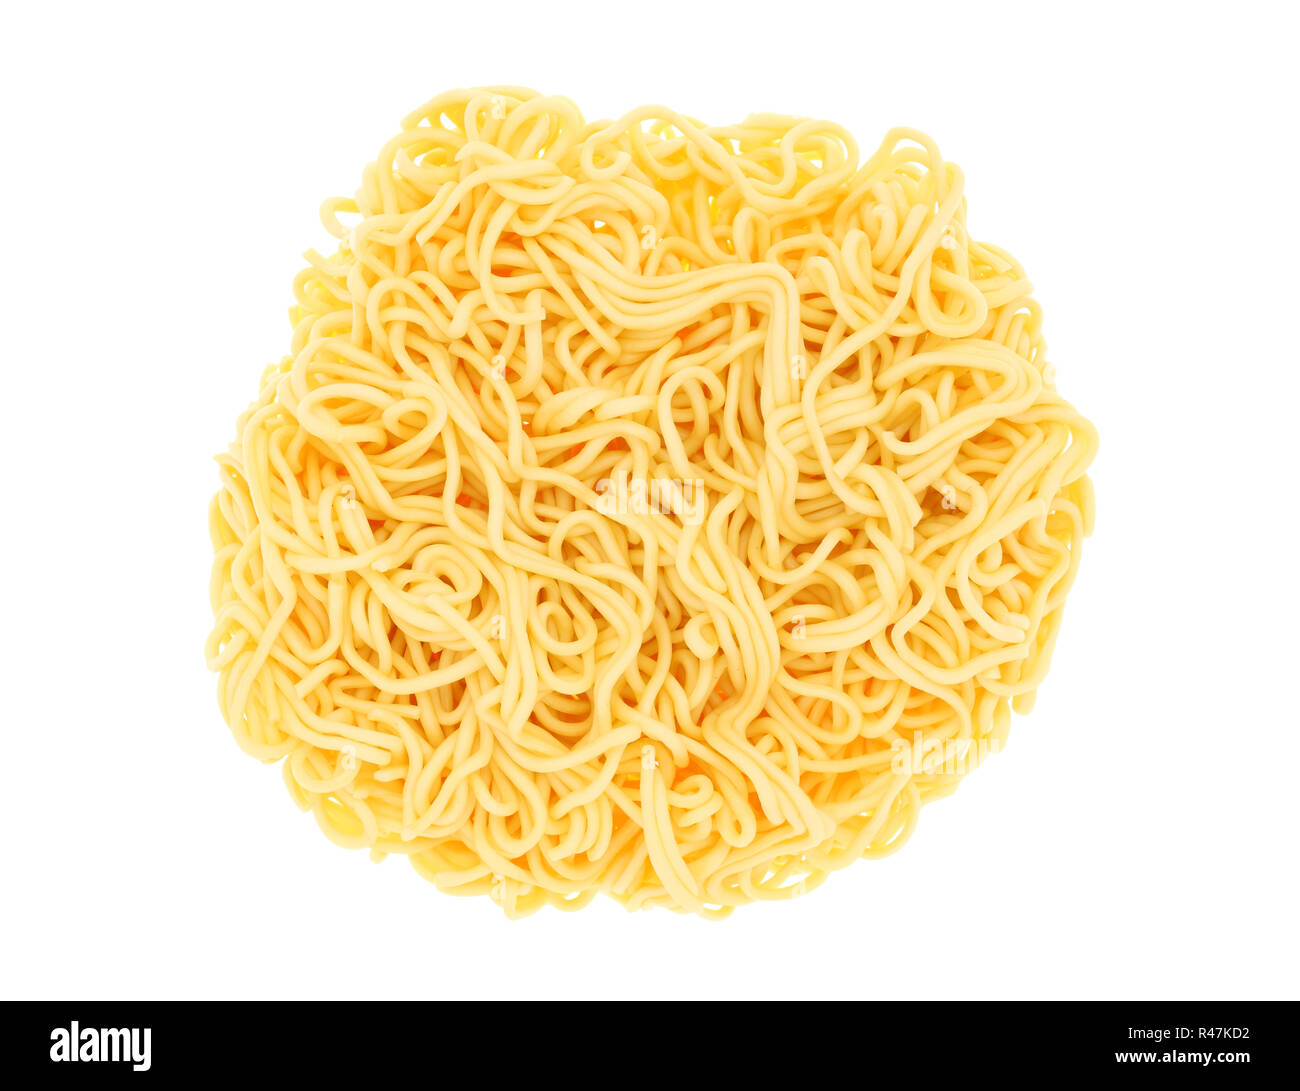 Dried instant noodles Stock Photo